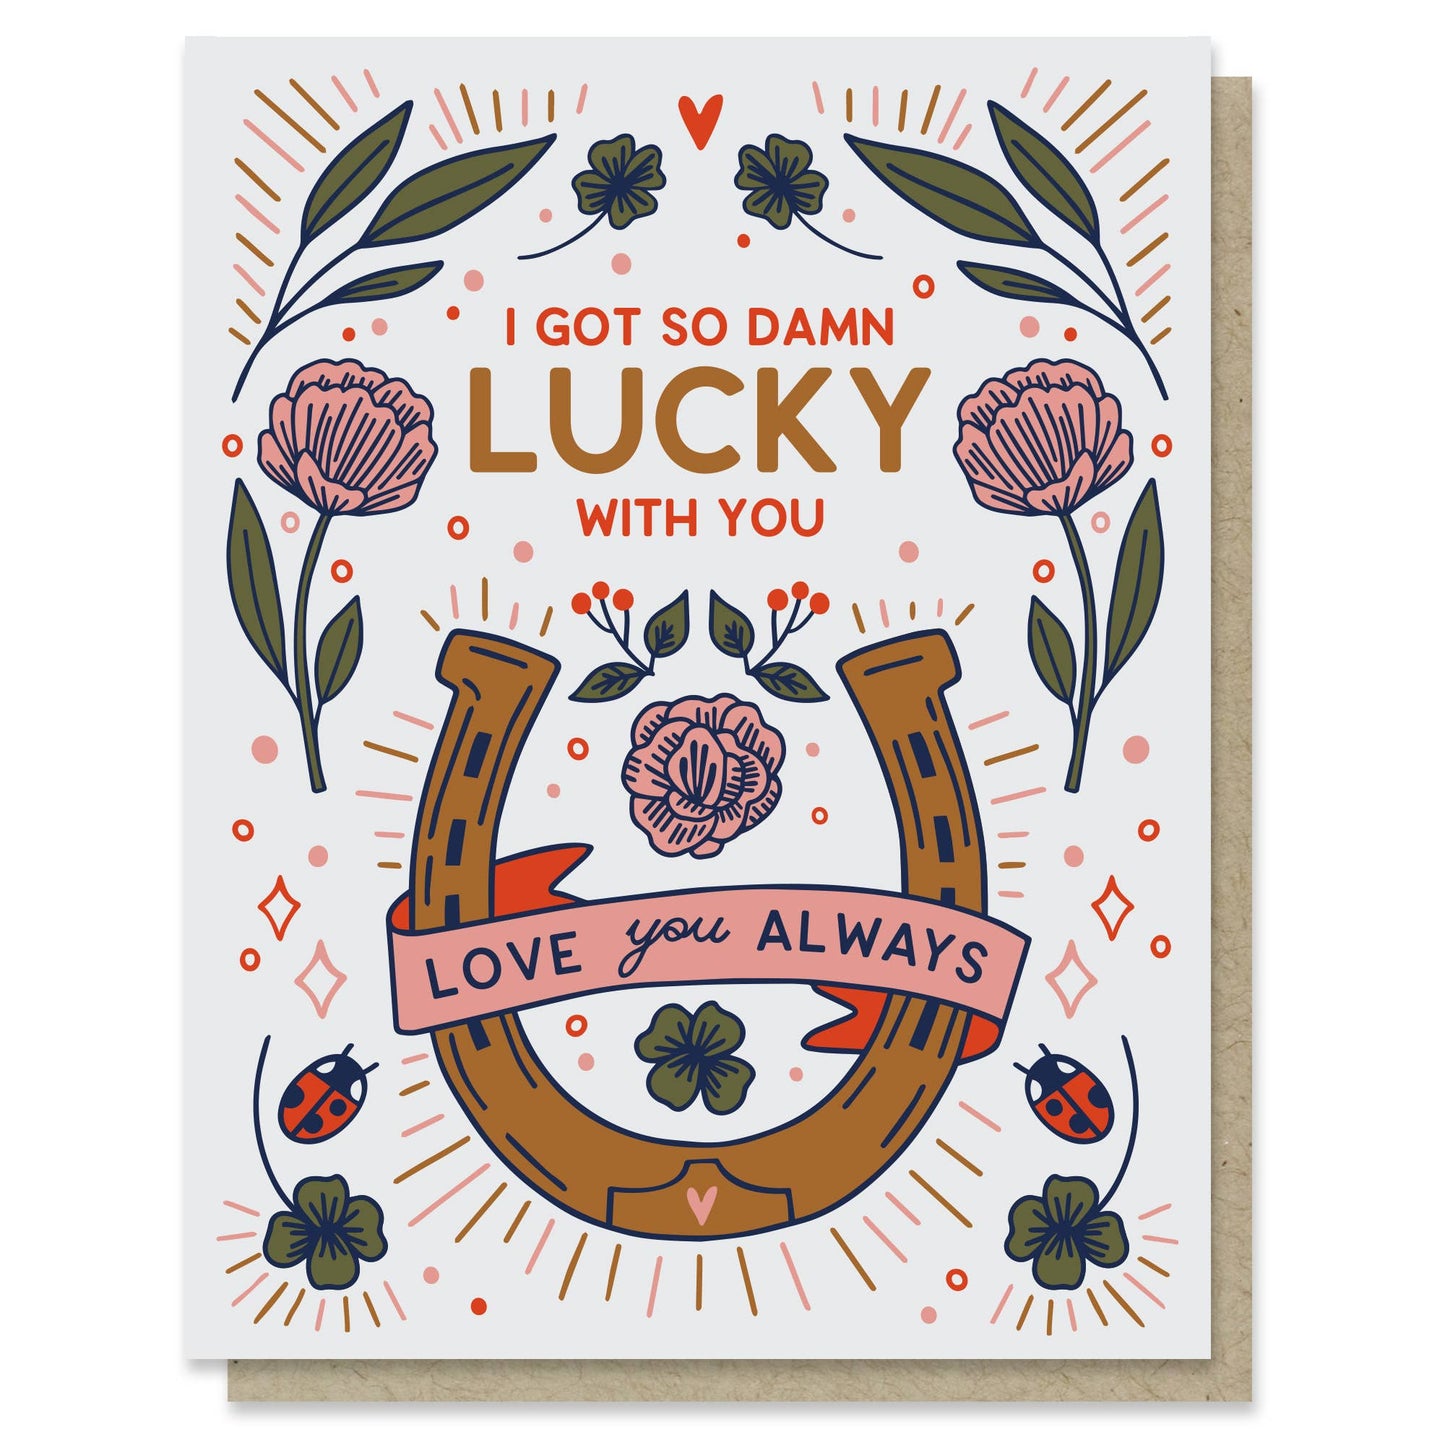 I got so damn lucky with you, love you always card with horseshoe, lady bugs and flowers, blank inside